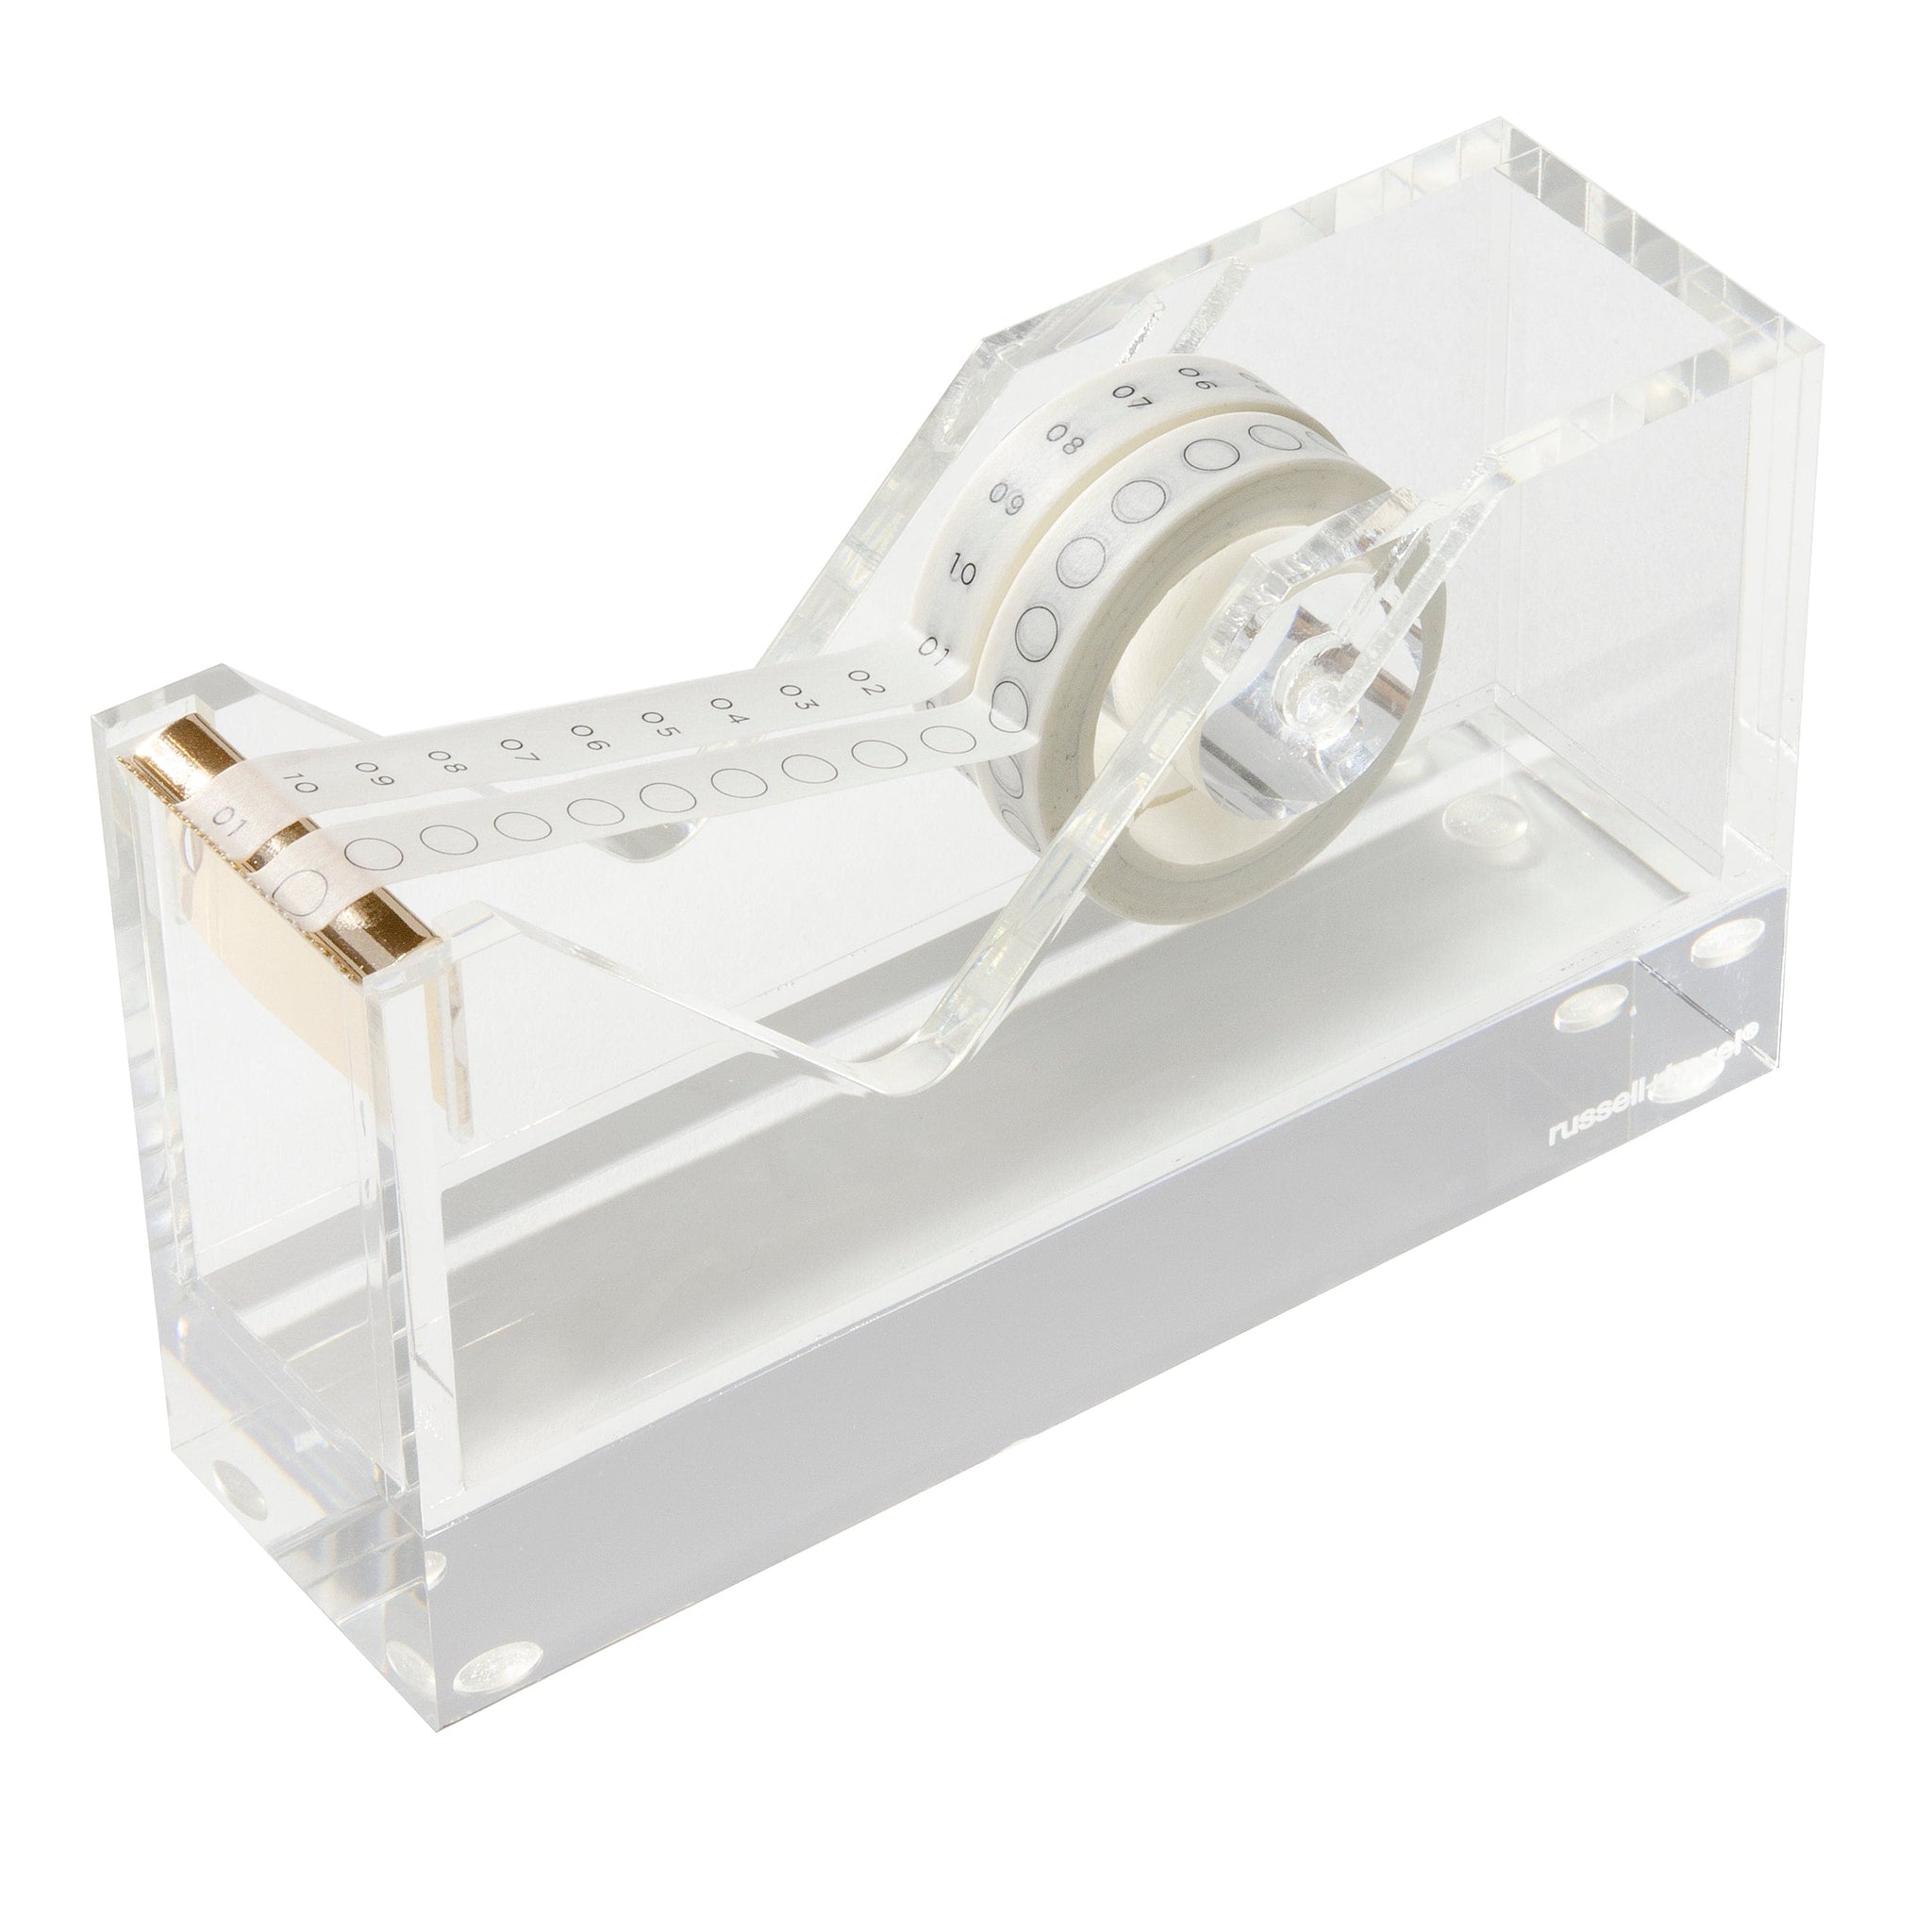 Clear Acrylic Desktop Tape Dispenser, 6 x 3.375 x 1.8125, with